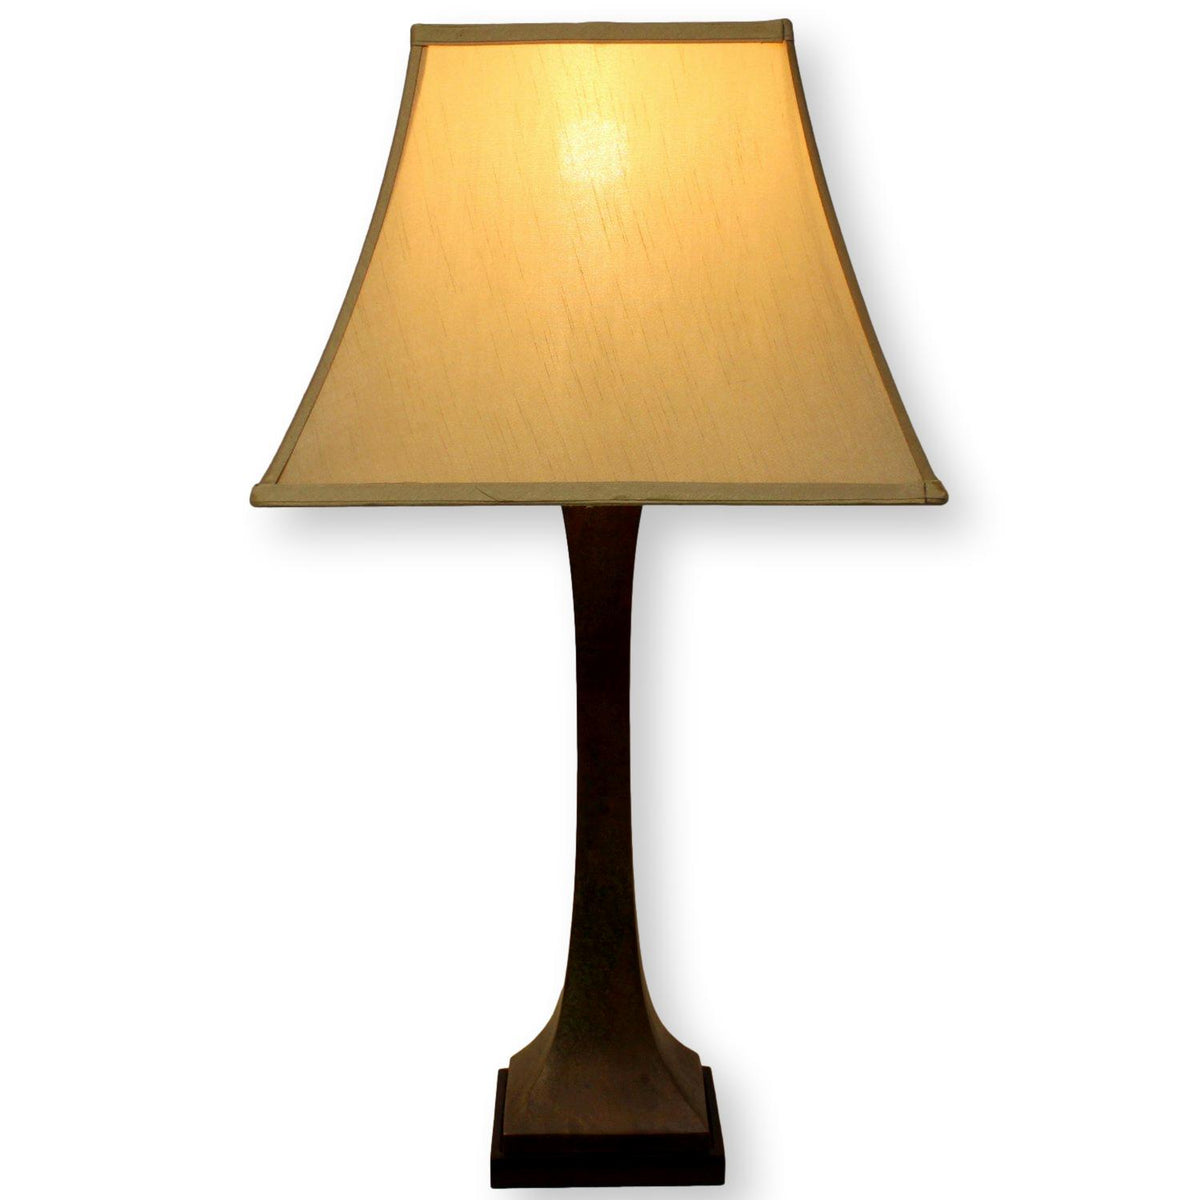 Square Bronze Toned Table Lamp w/Square Shade